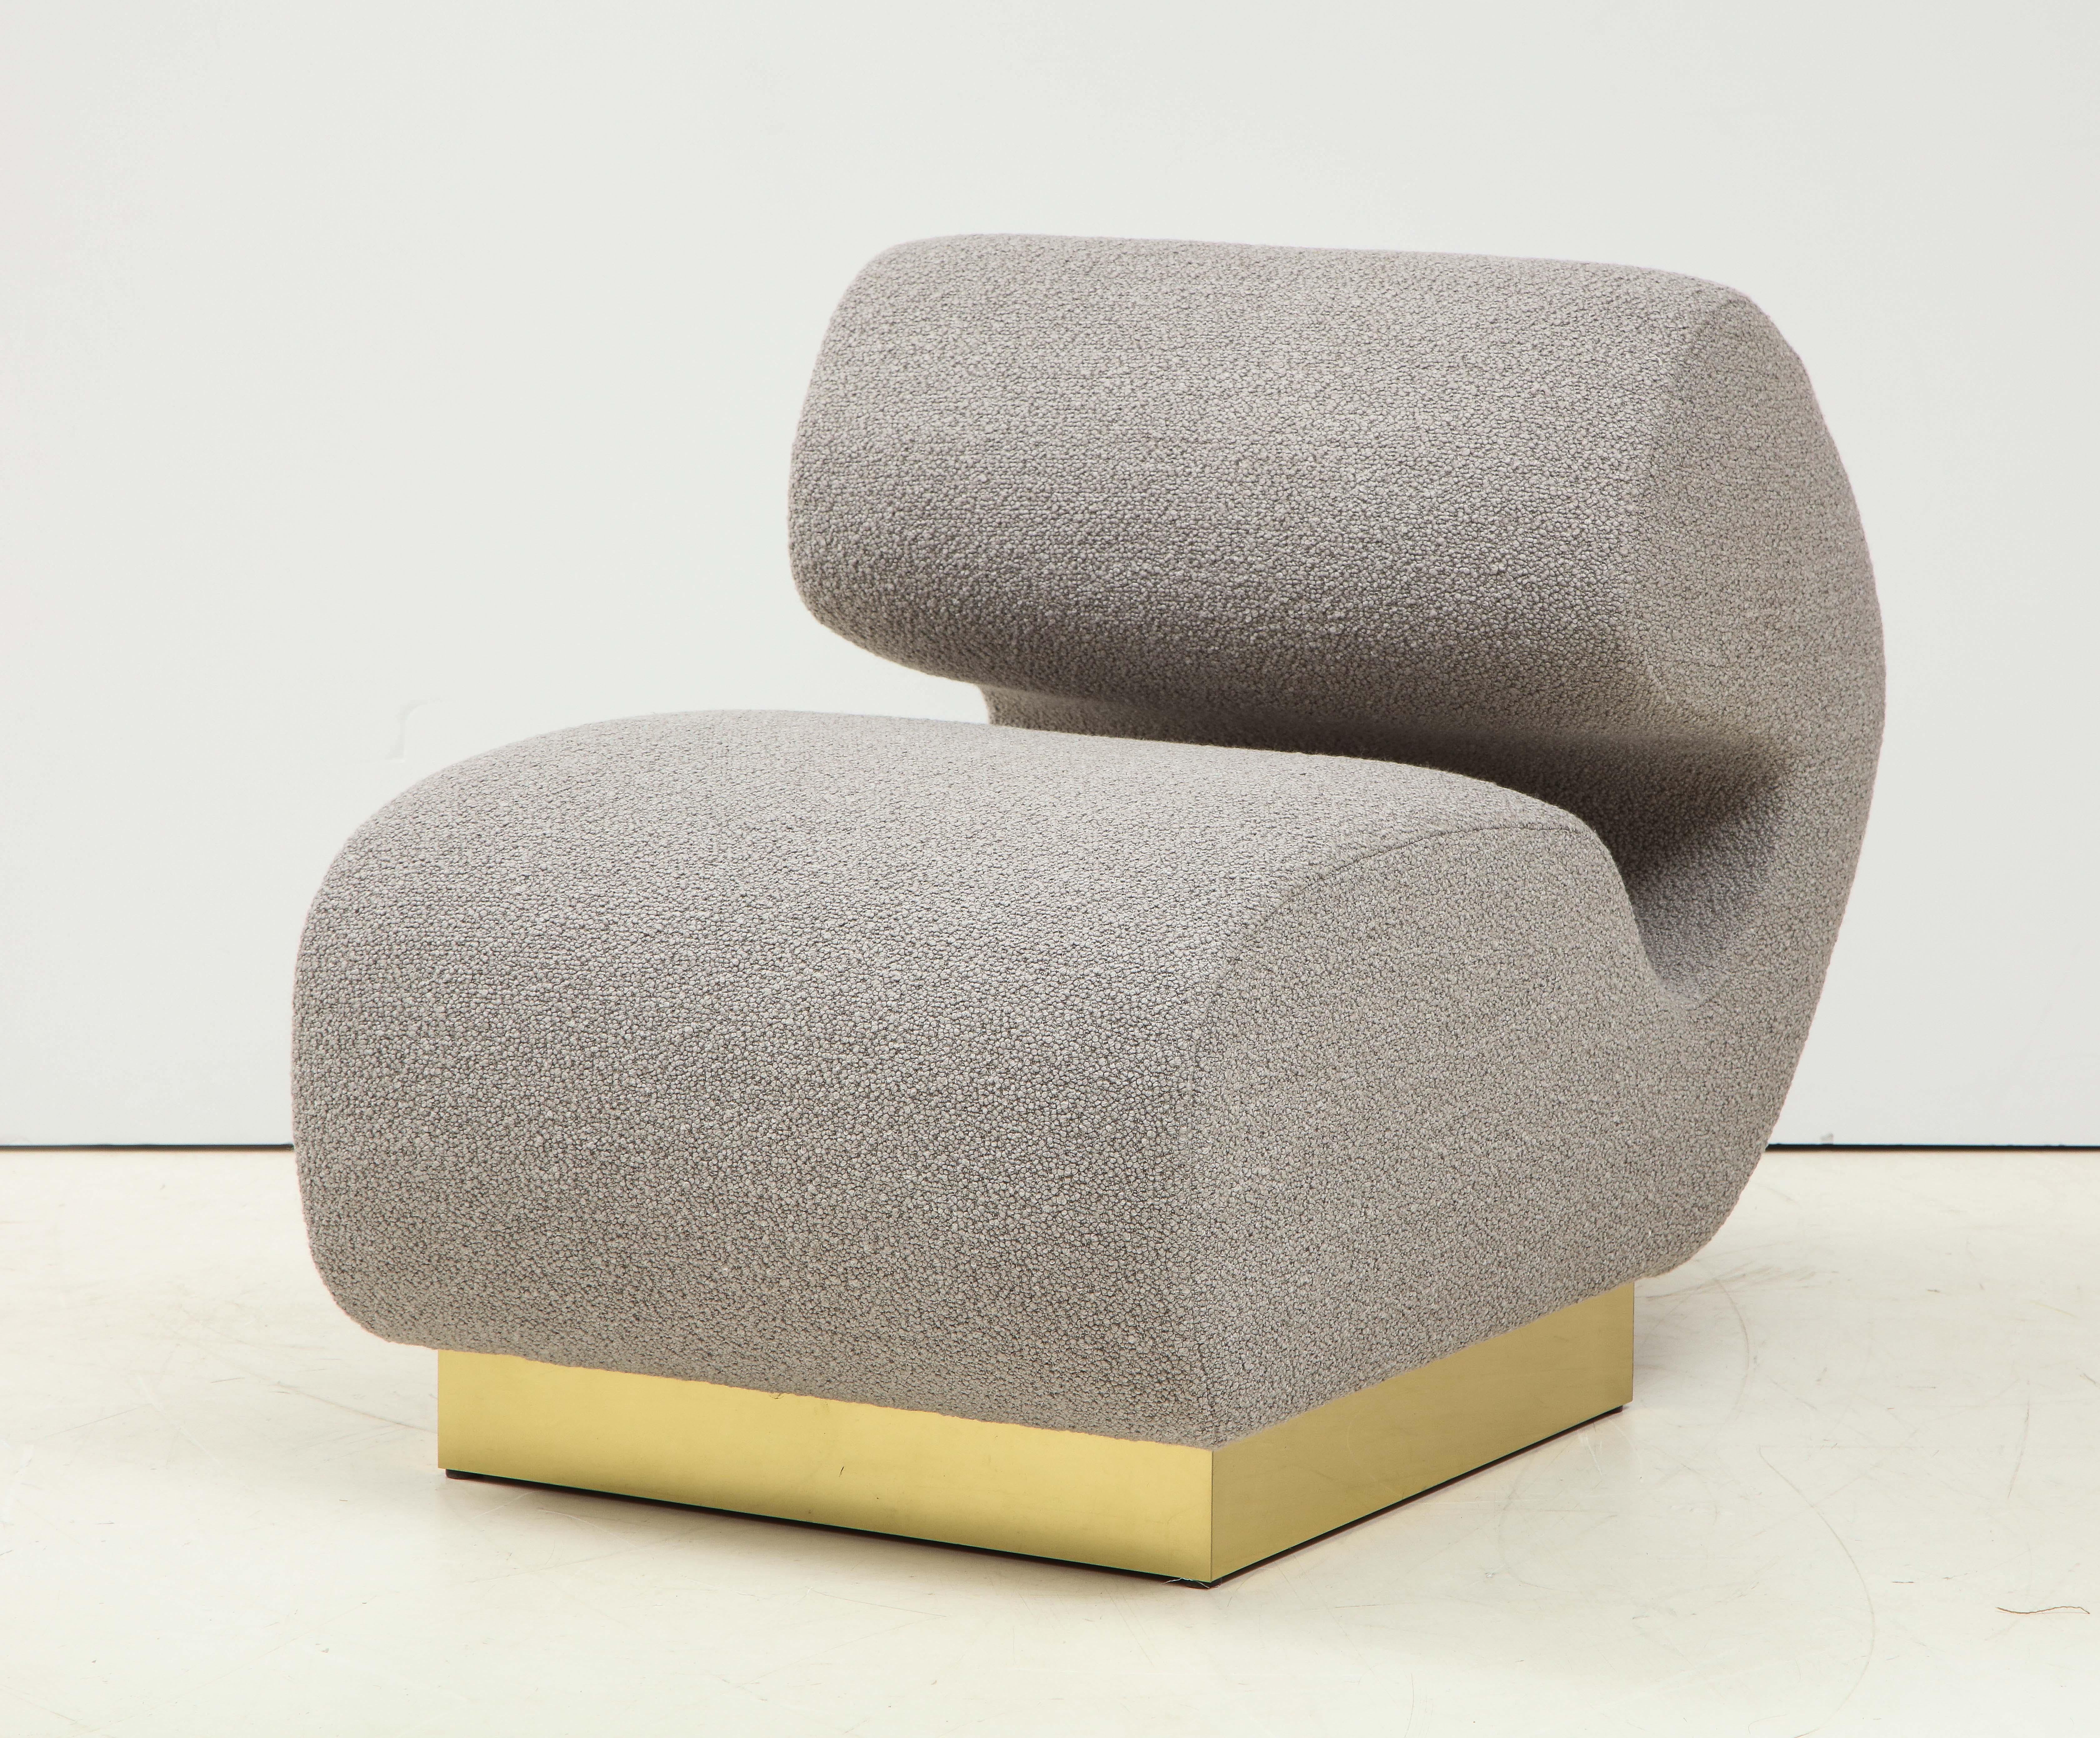 Pair of Sculptural Lounge Chairs in Grey Bouclé Fabric and Brass Base, Italy 1